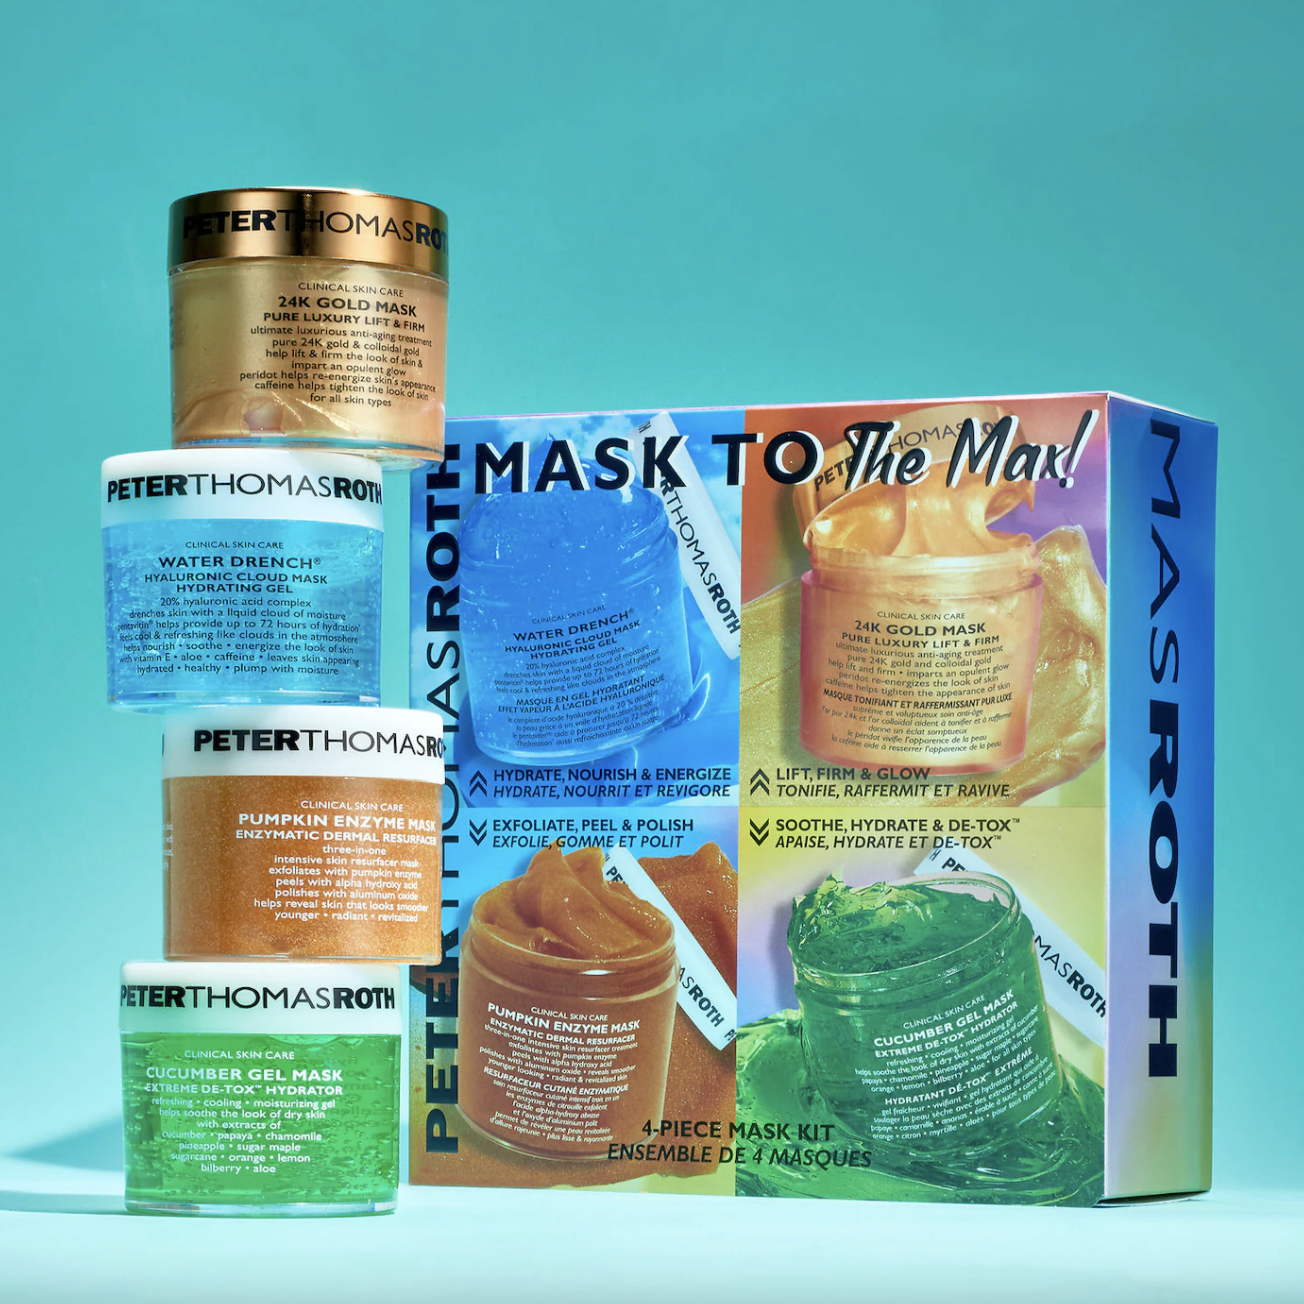 The four masks (green, blue, orange, and gold) next to the box